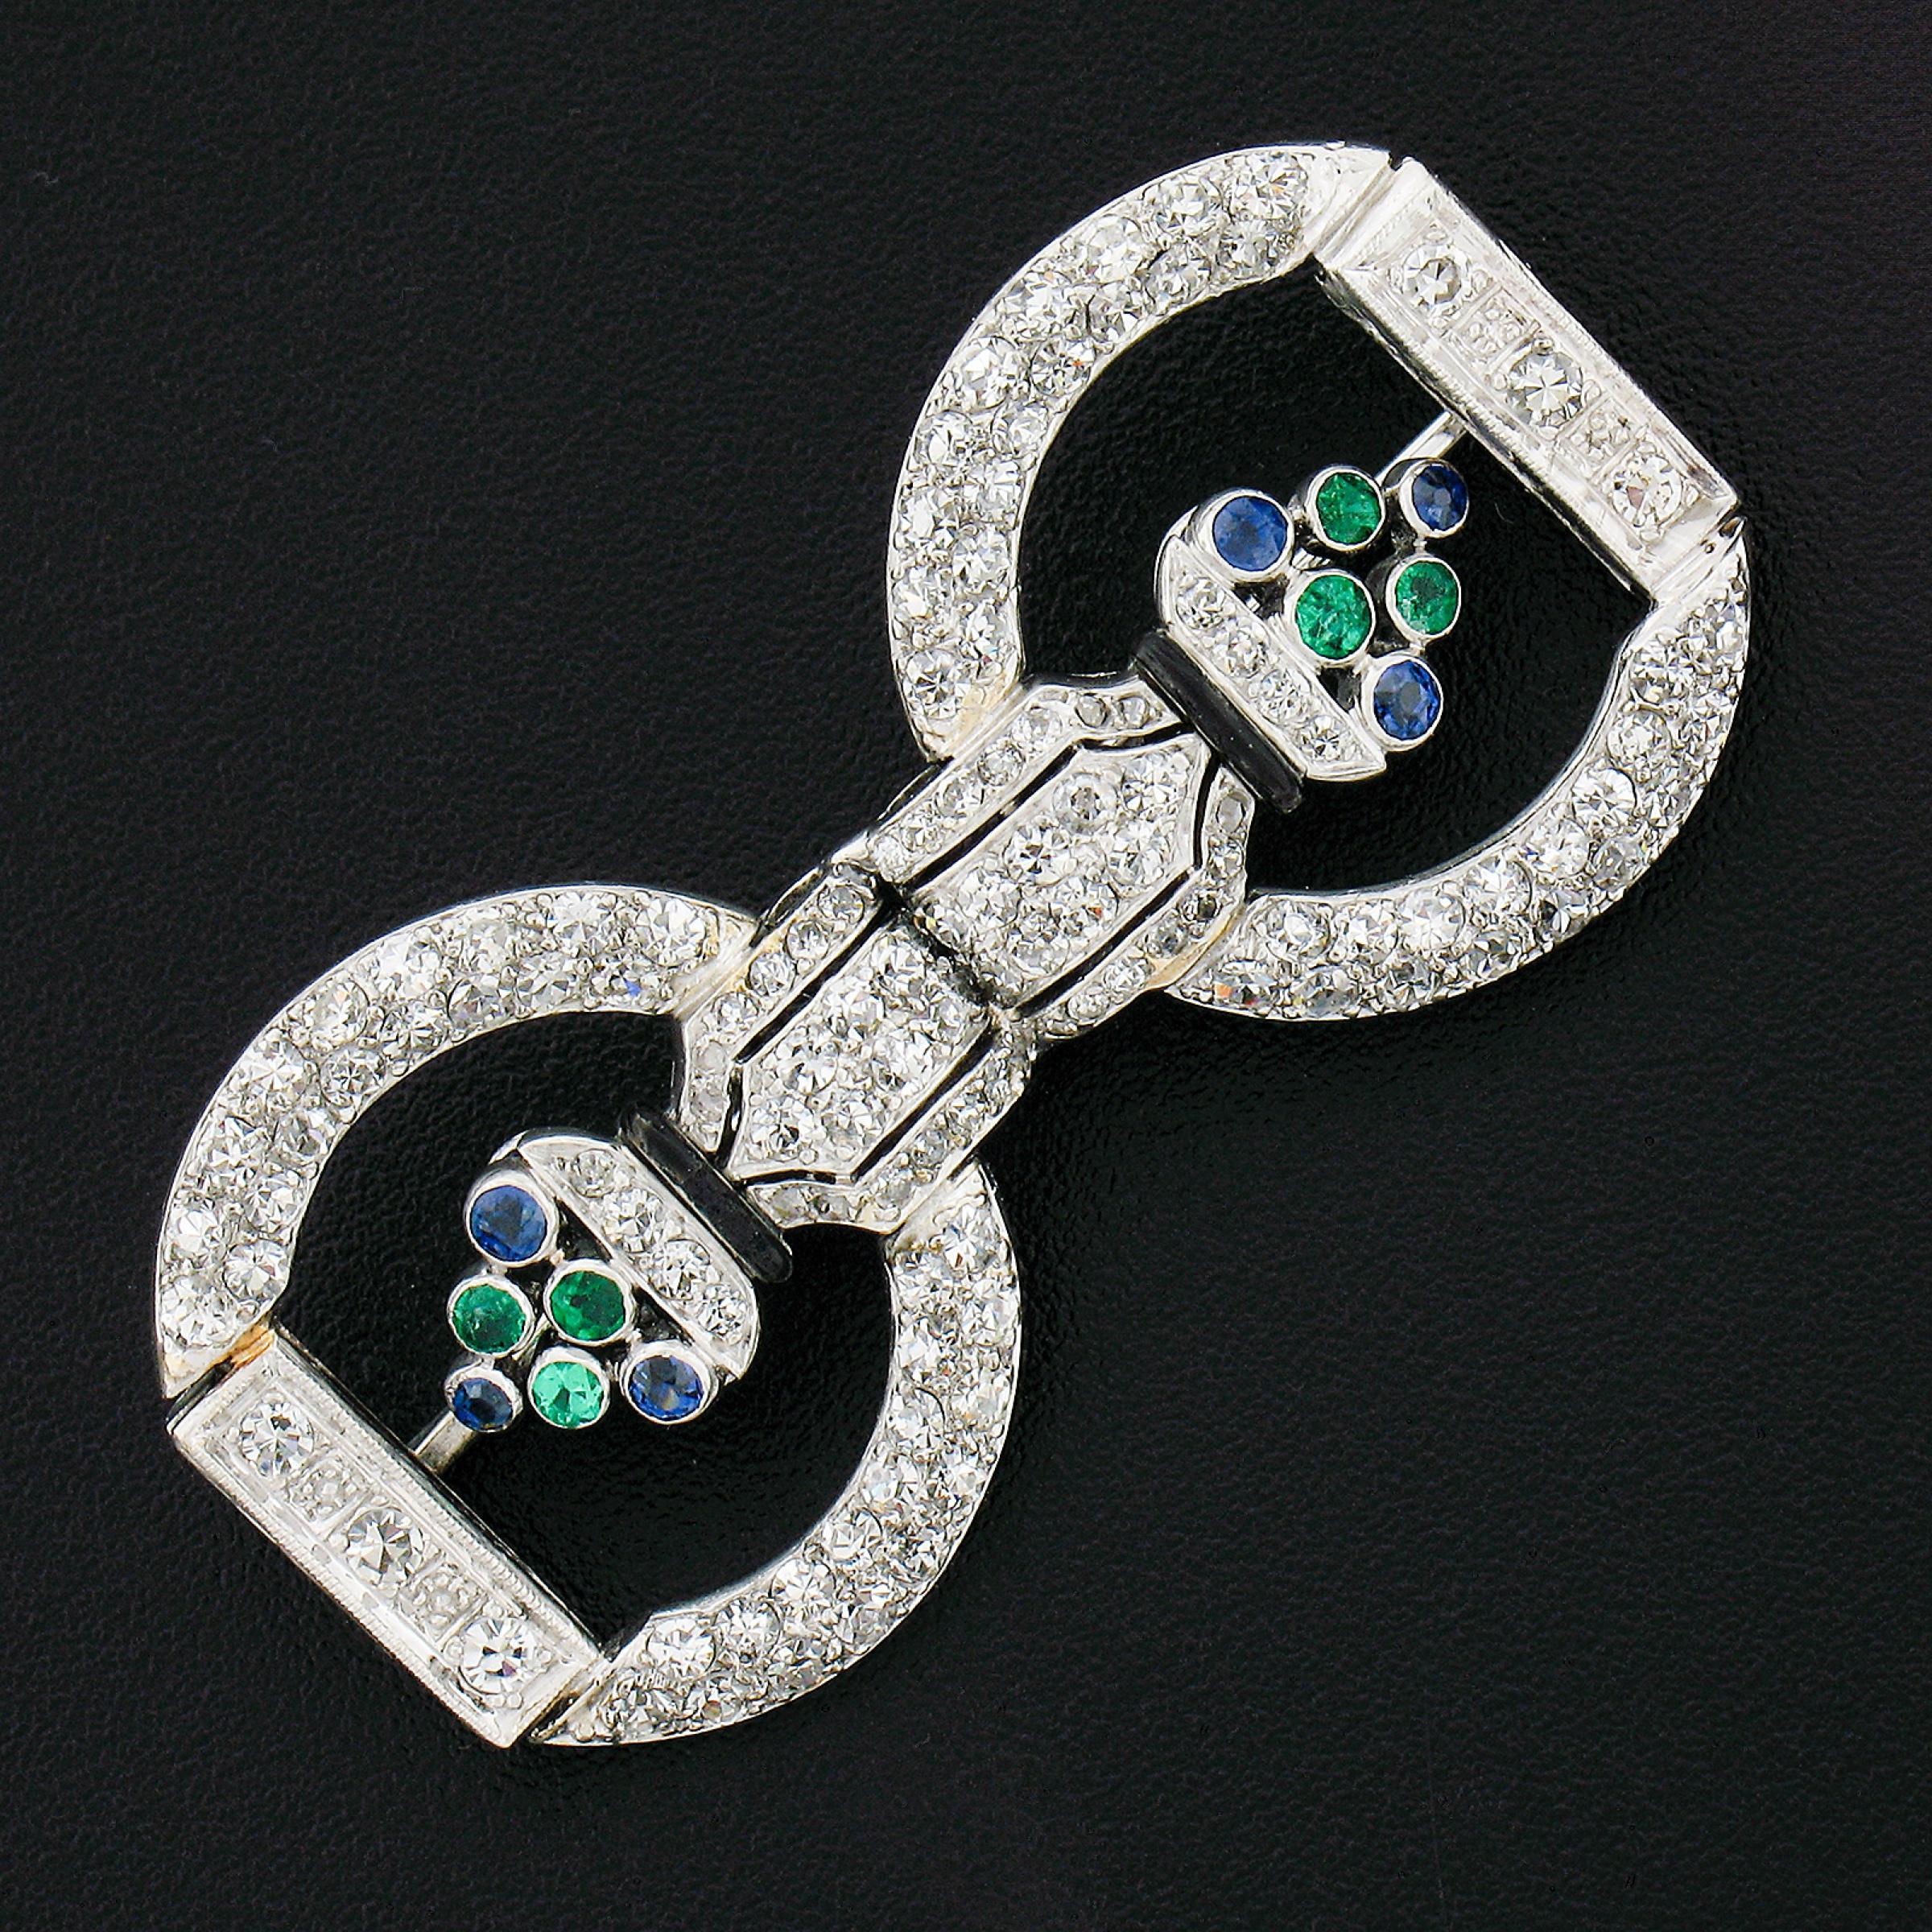 This stunning antique pin/brooch is crafted in solid platinum during the art deco period. It features the most adorable floral patterns and is completely drenched with fine quality old European and single cut diamonds, six genuine emeralds and six